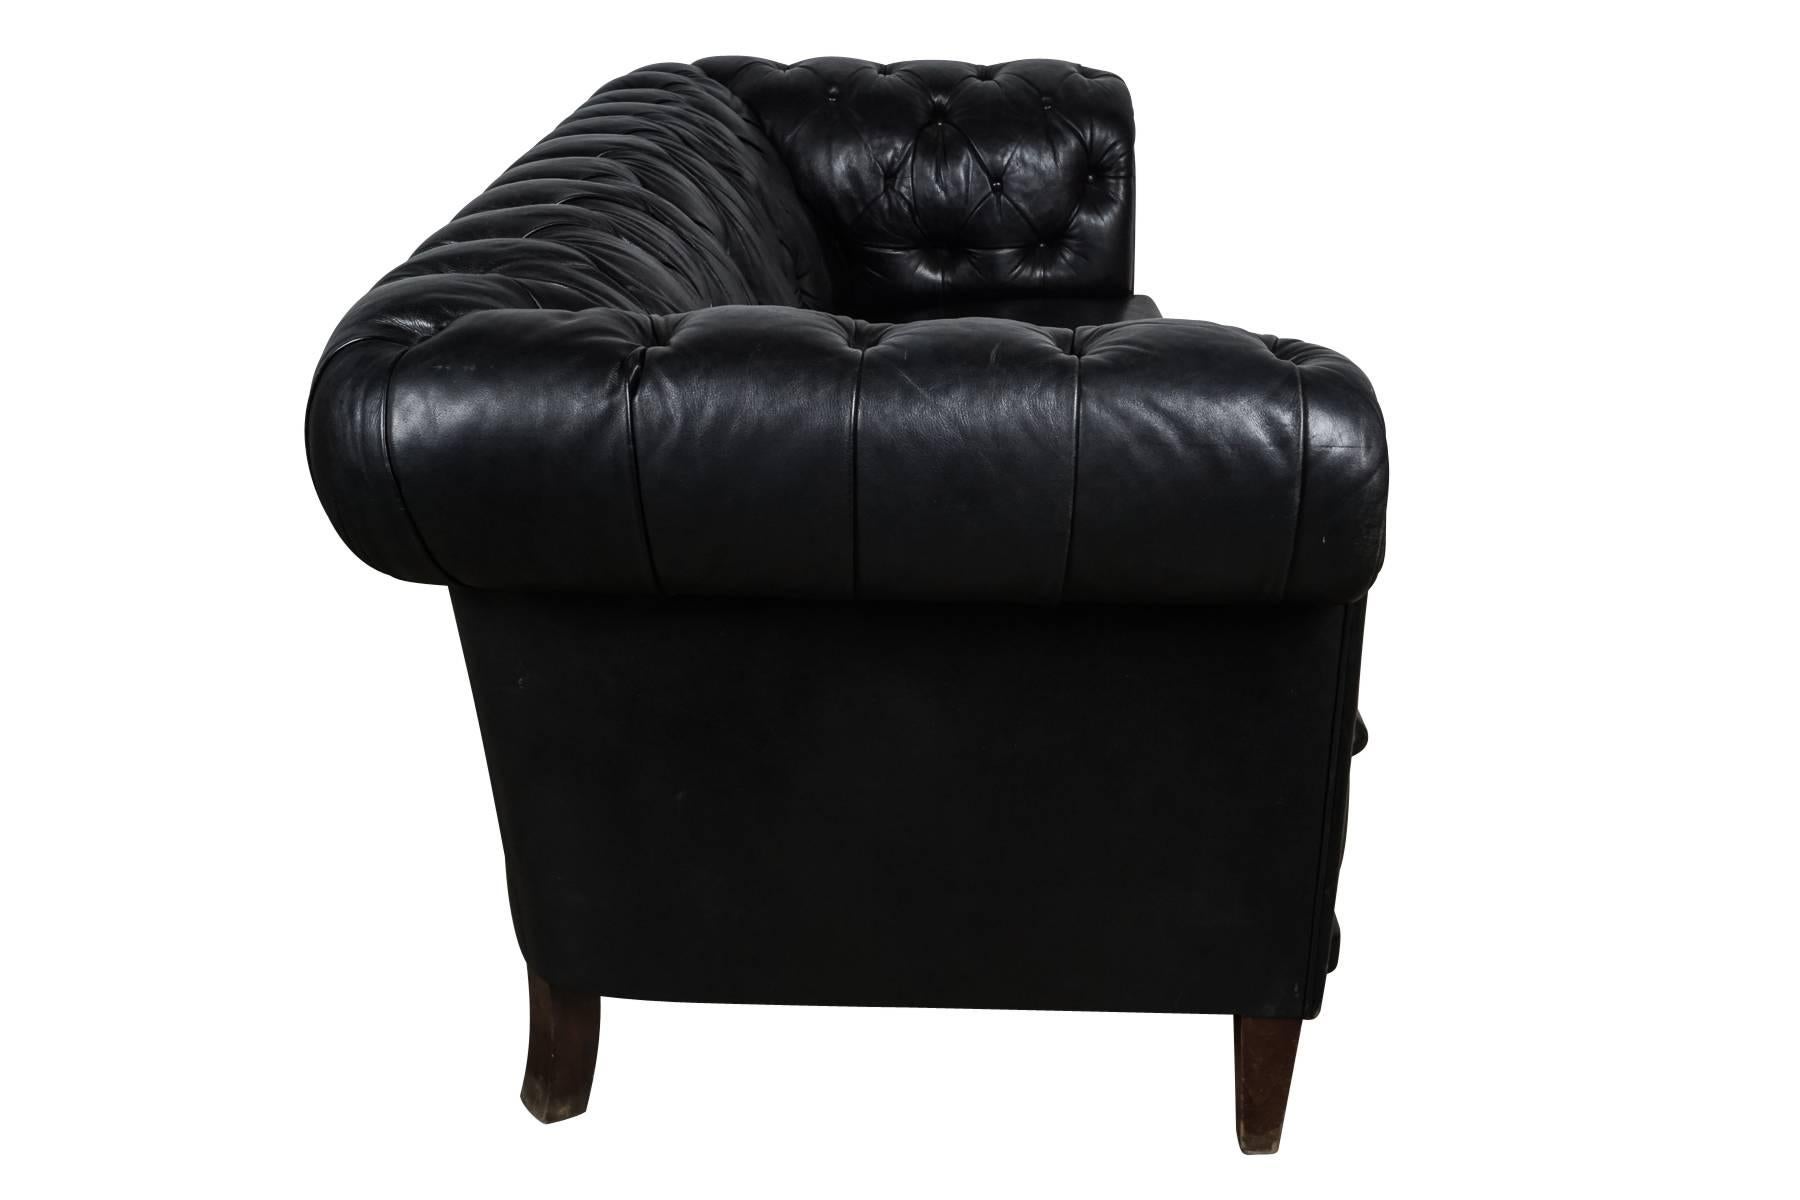 Vintage Black Leather Chesterfield Sofa 2